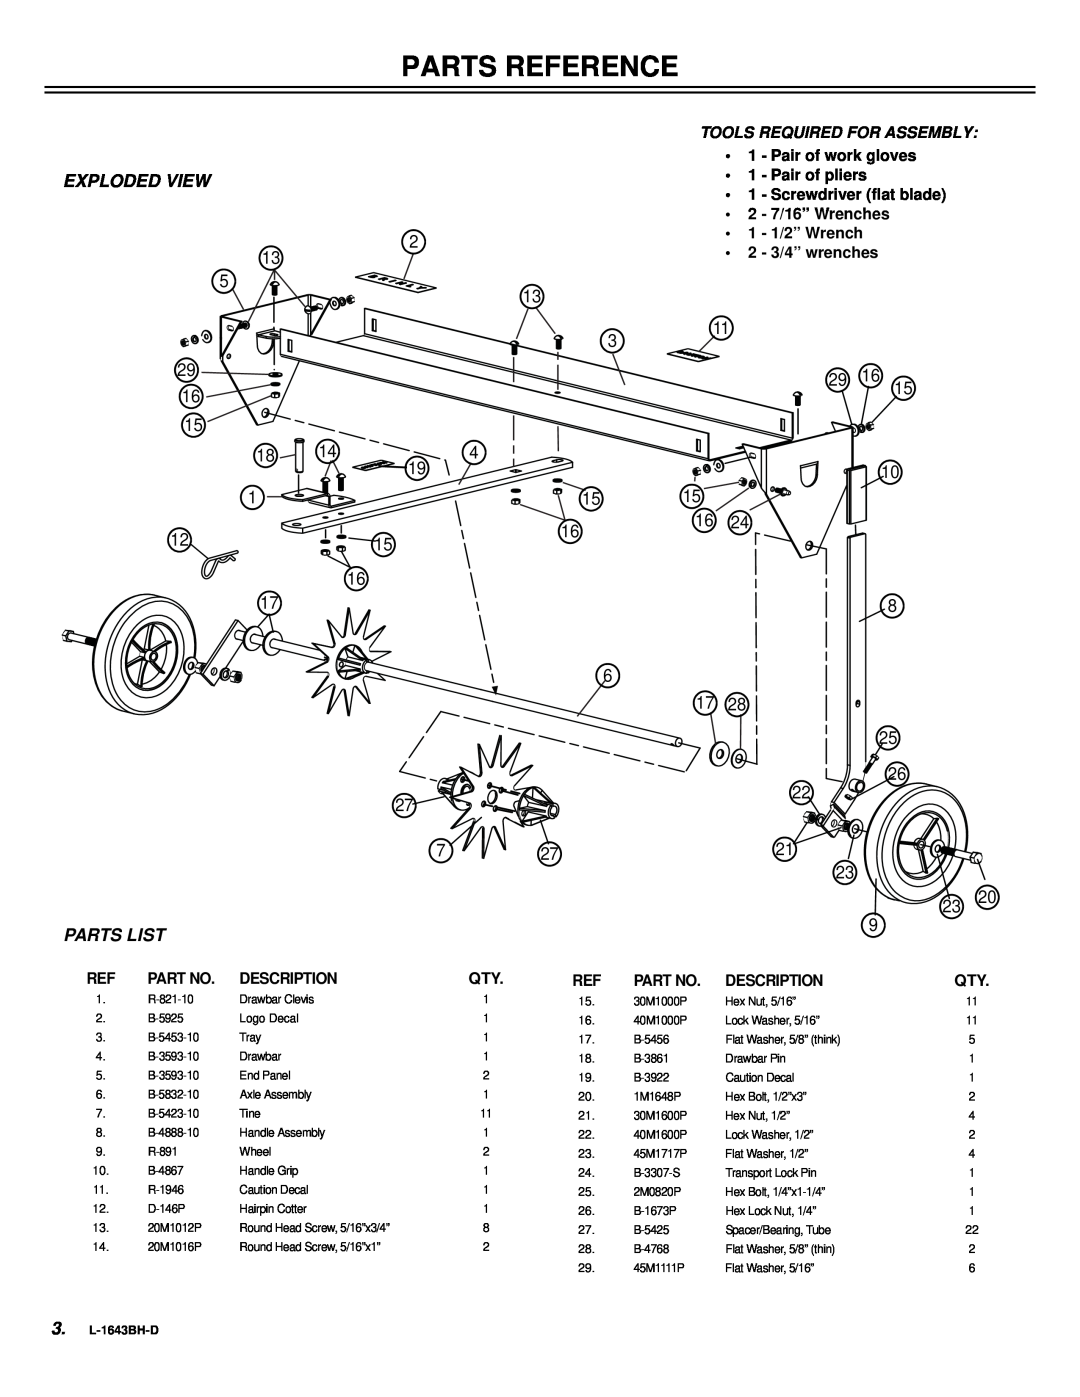 Sears S A T - 4 0 B H owner manual Parts Reference, Exploded View, Parts List, Tools Required For Assembly, 3. L-1643BH-D 